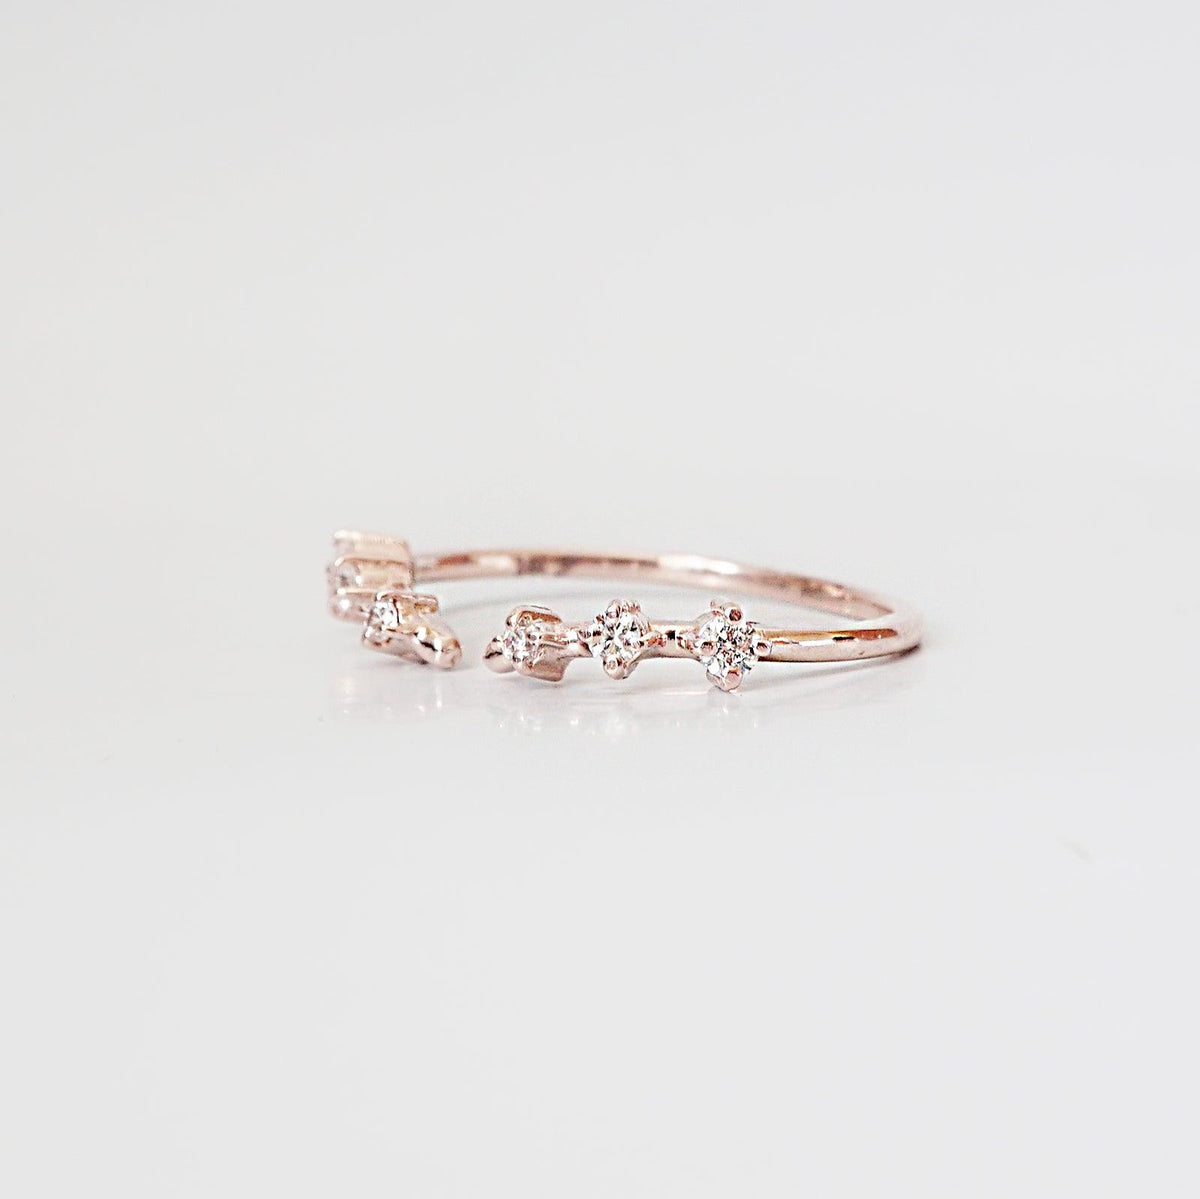 Rose Thorn Ring Band - Tippy Taste Jewelry